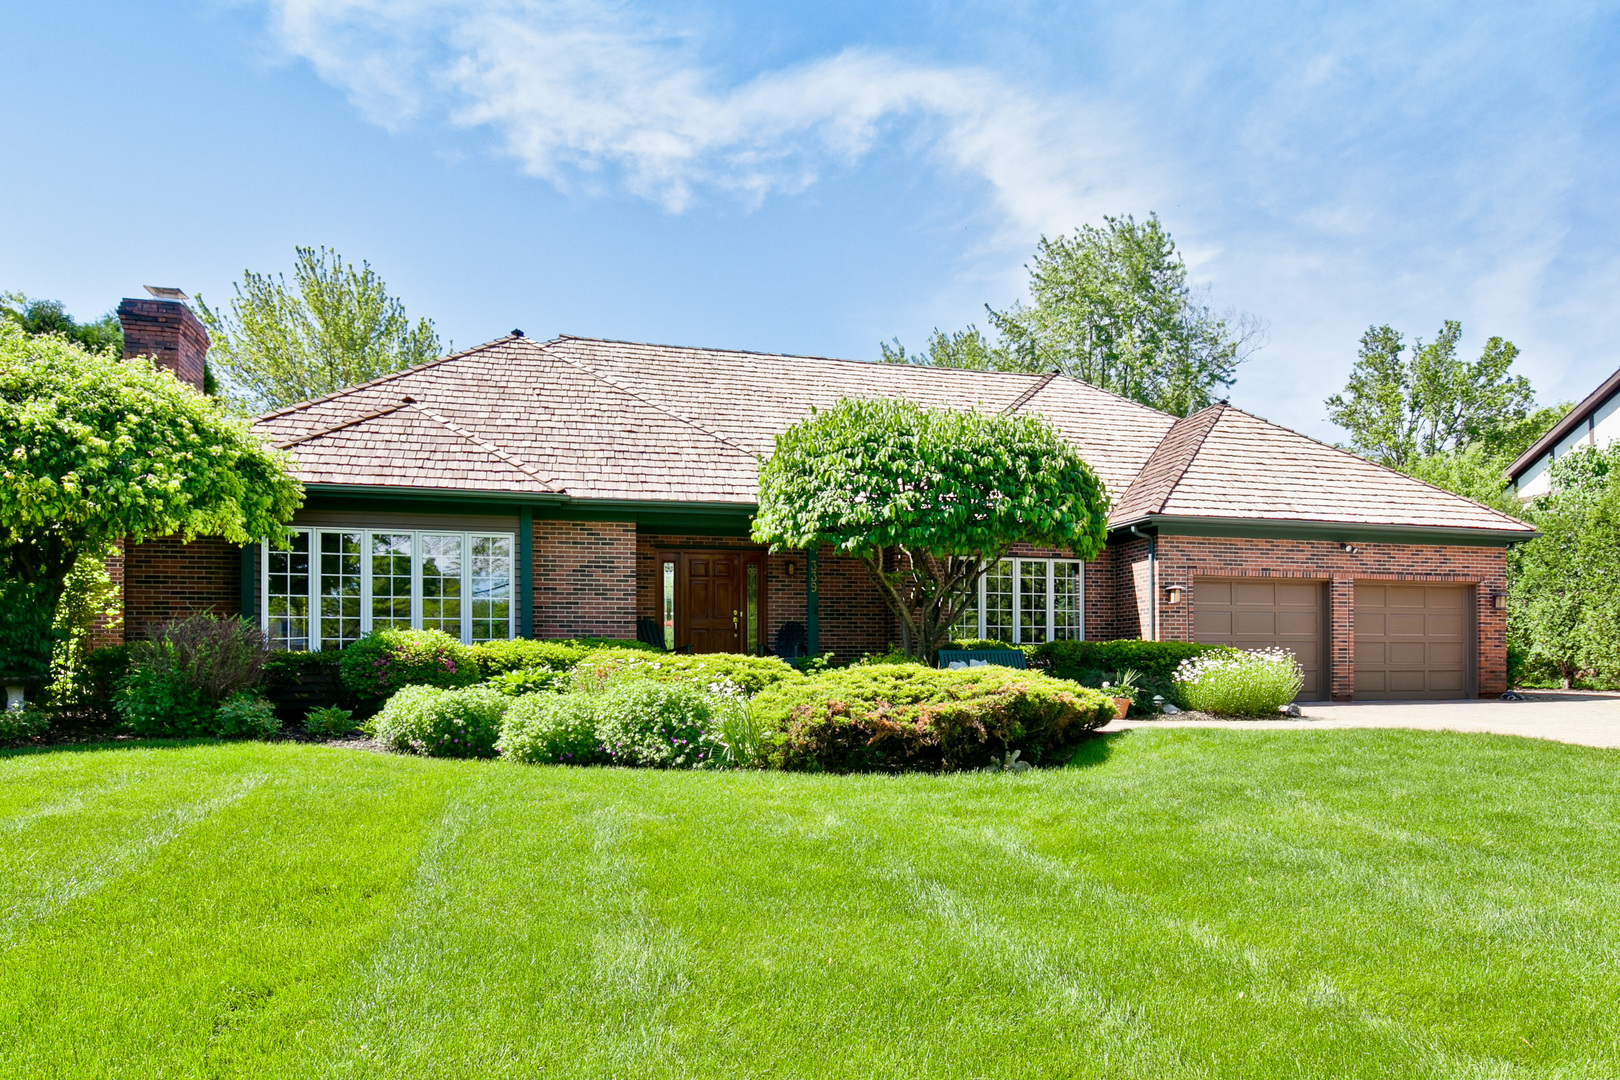  Lake  Forest  IL Homes  for Sale Lake  Forest  Real Estate  Bowers Realty Group